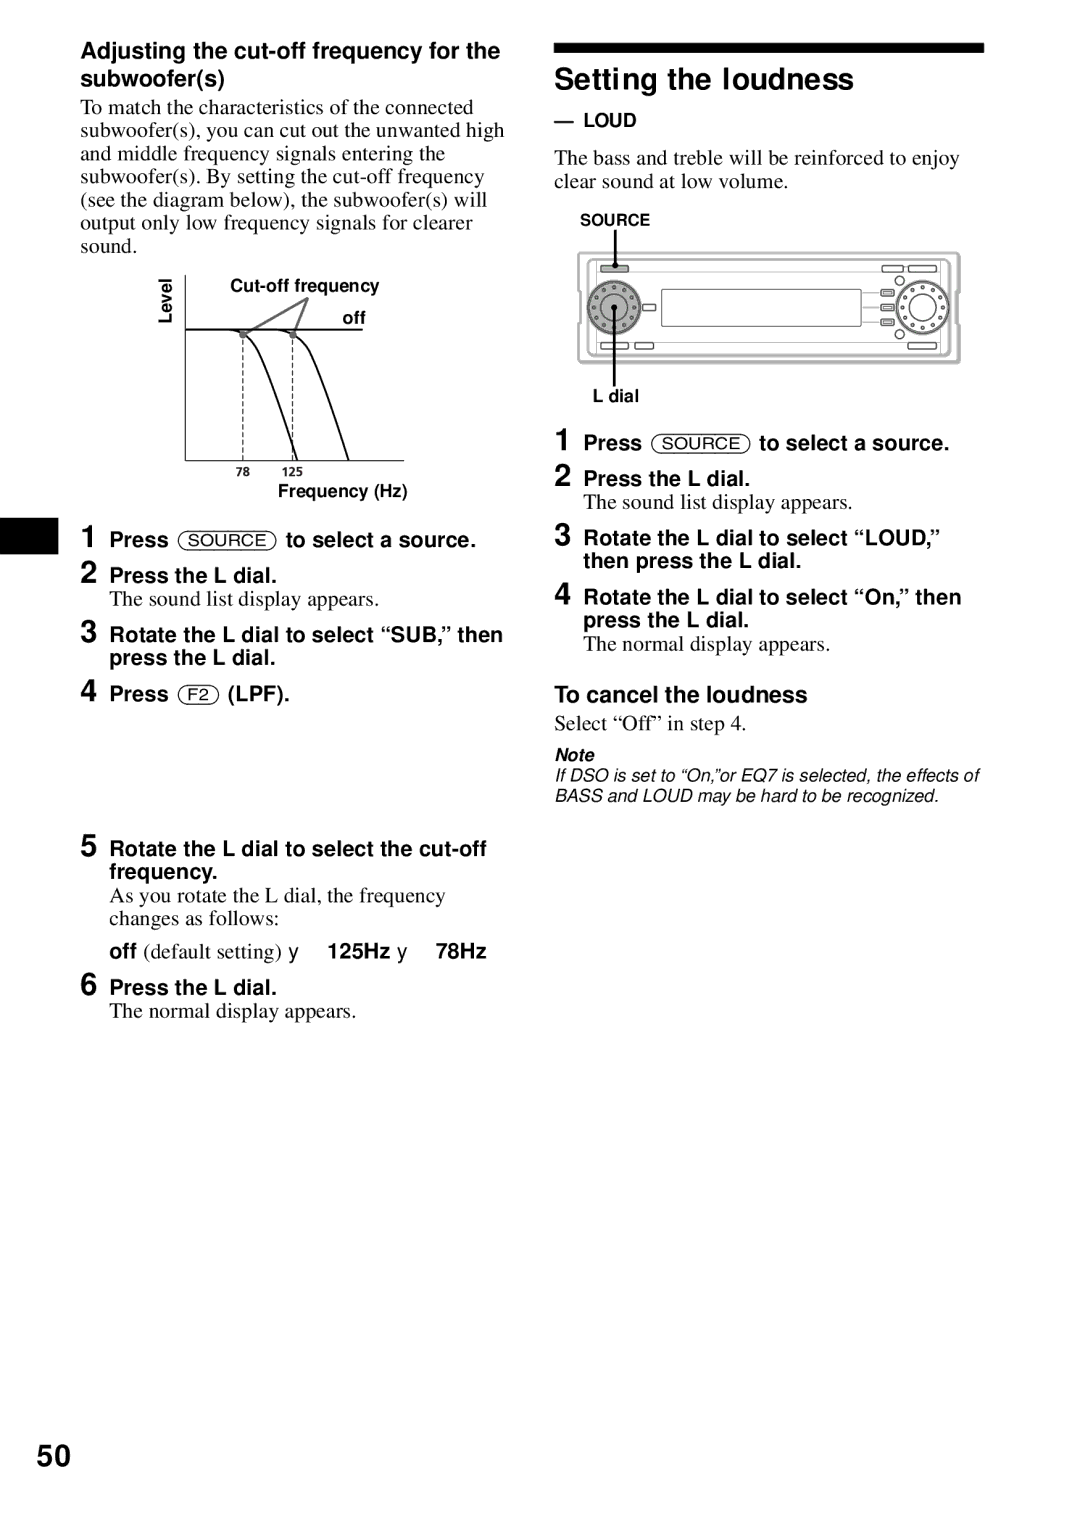 Sony MEX-1HD operating instructions Adjusting the cut-off frequency for the subwoofers 